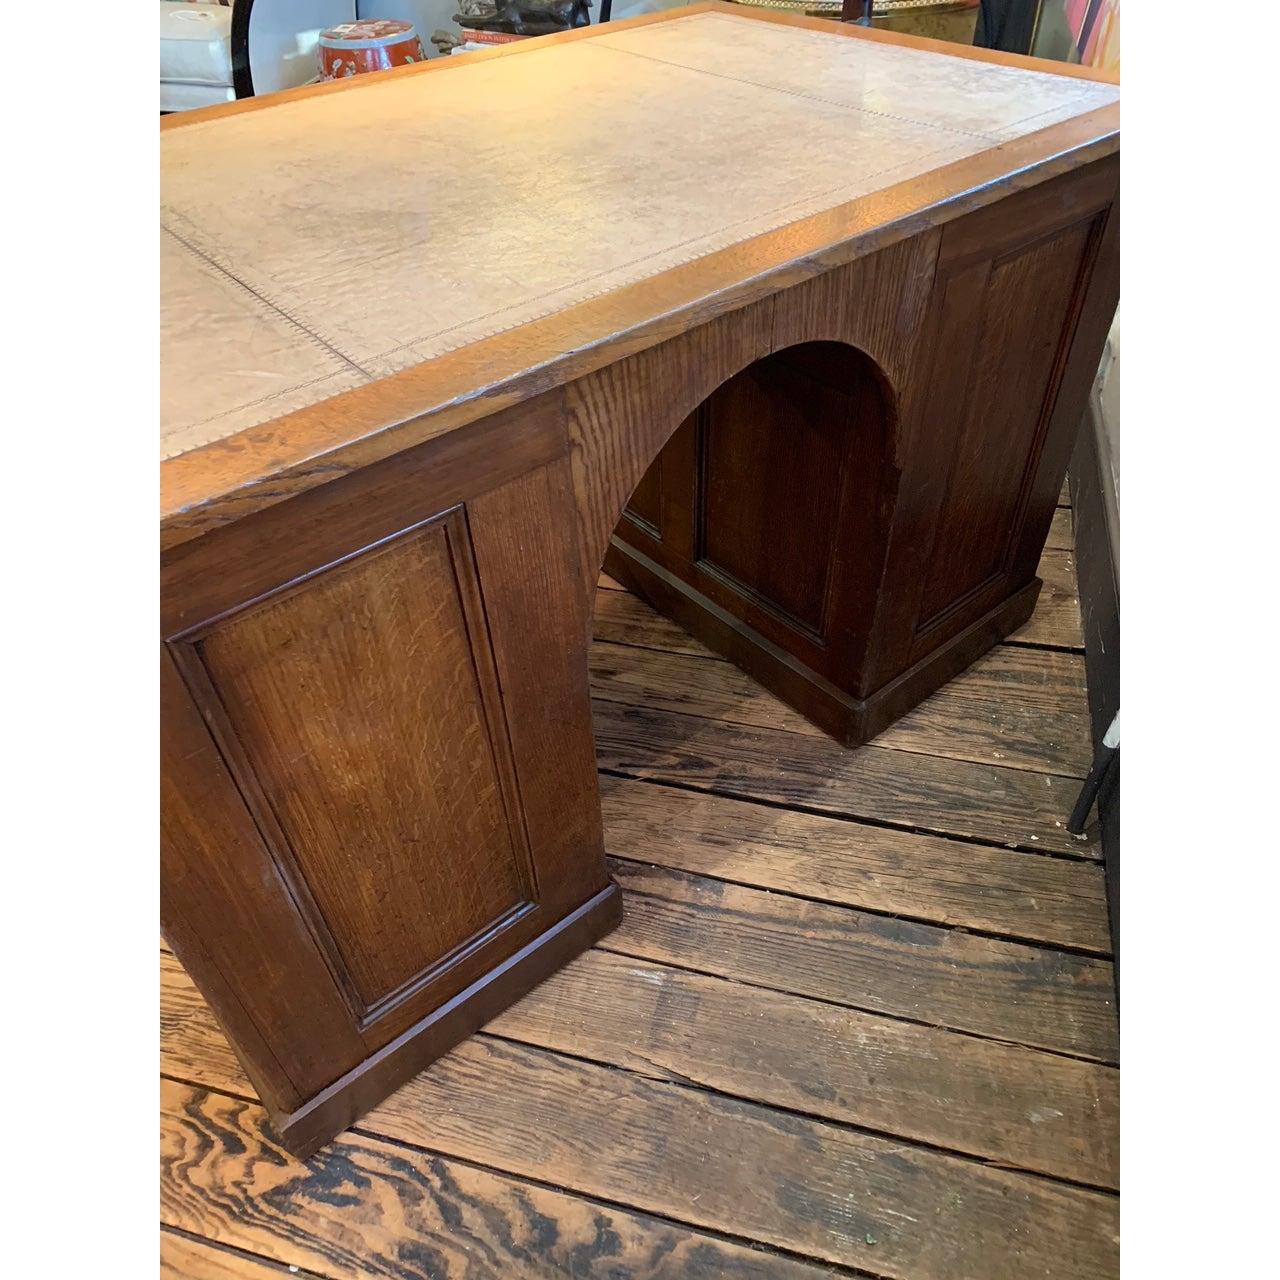 Handsome English double pedestal desk with grain painted, paneled sides, arched front, and 4 drawers in each pedestal on one side. Tooled light tan leather top in good condition.
From the estate of a prominent New England decorator.

Measures: